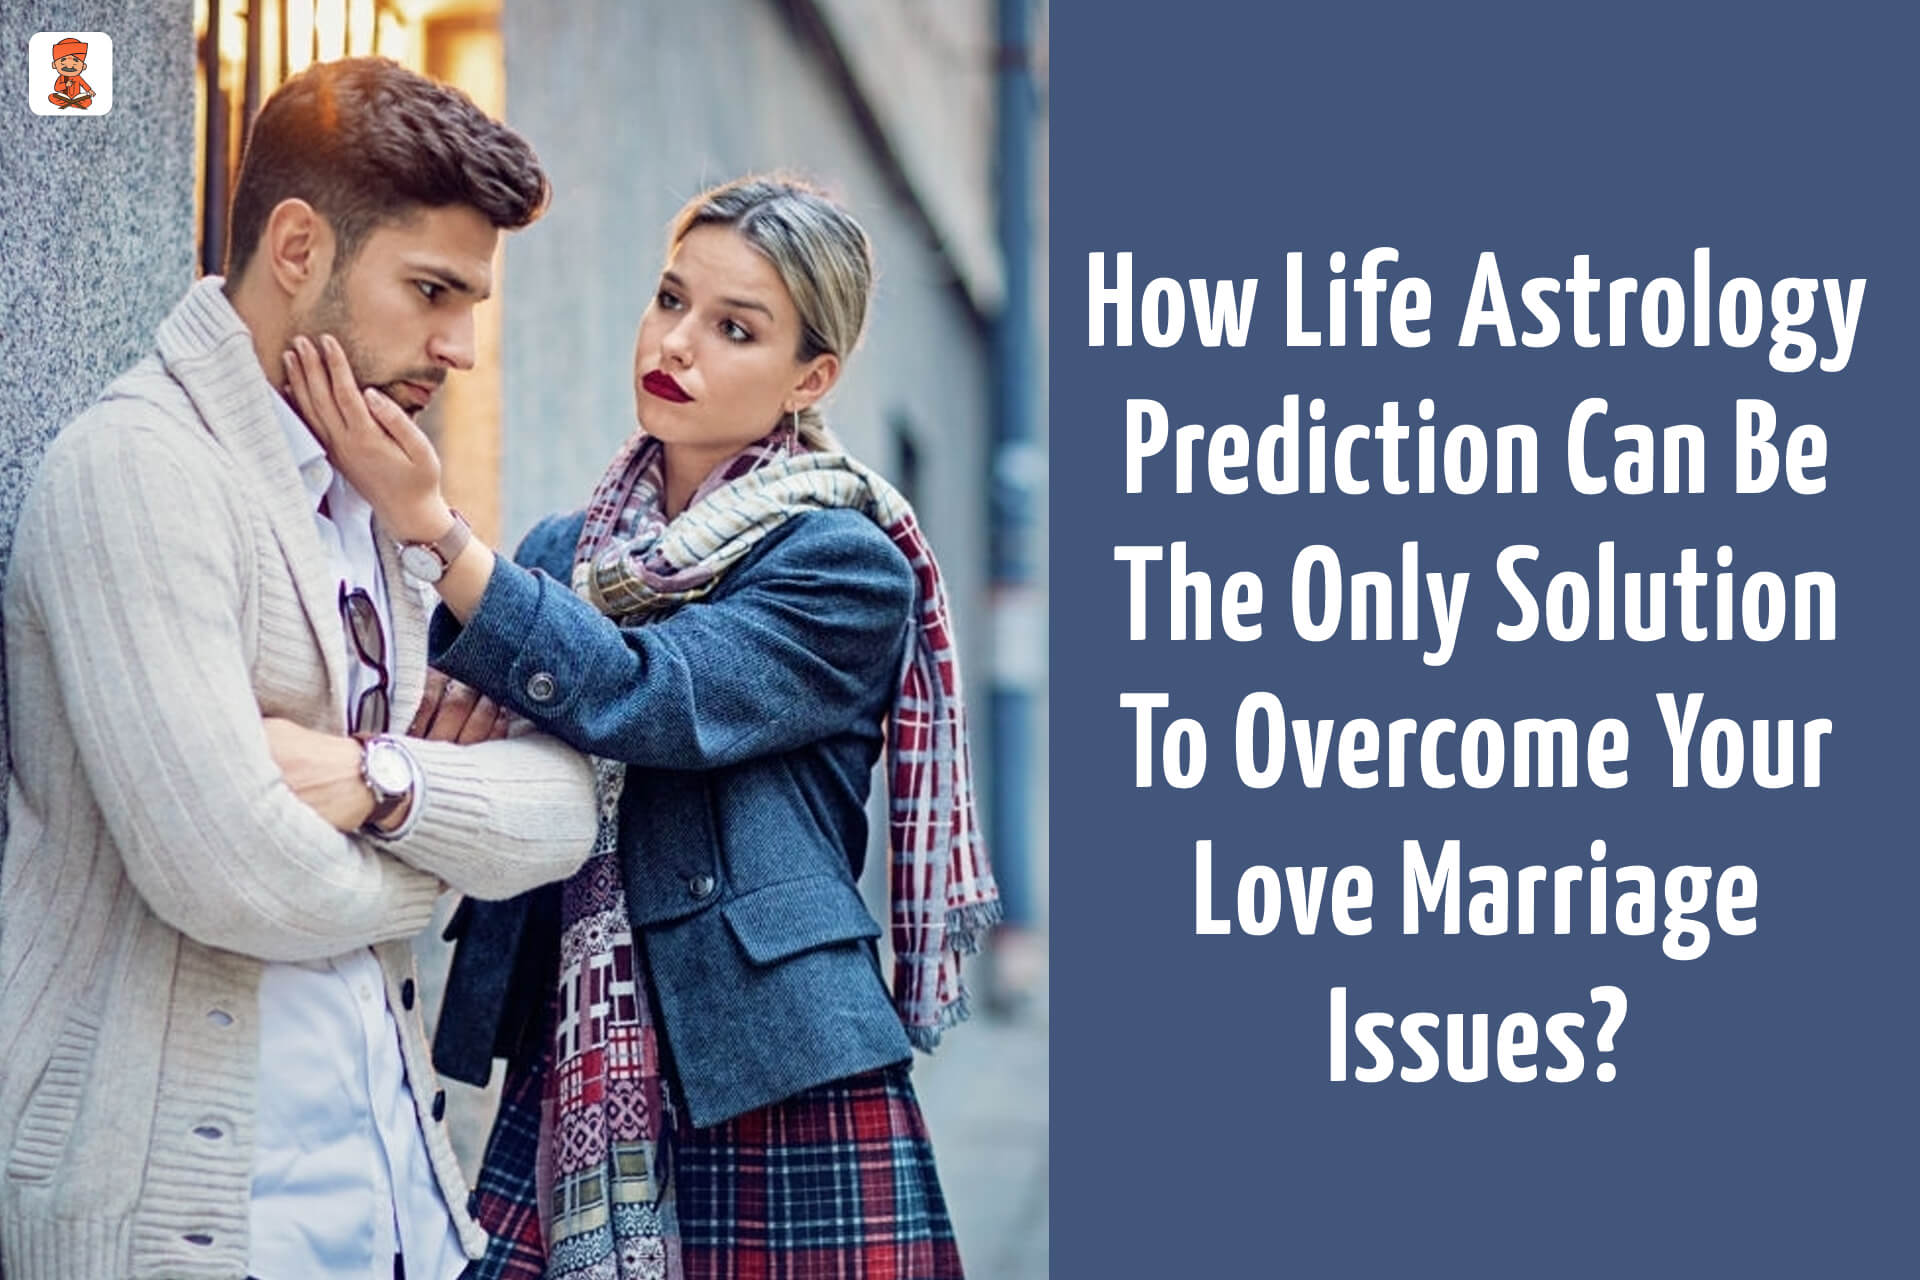 How Life Astrology Prediction Can Be The  Solution For Love Marriage Issues?